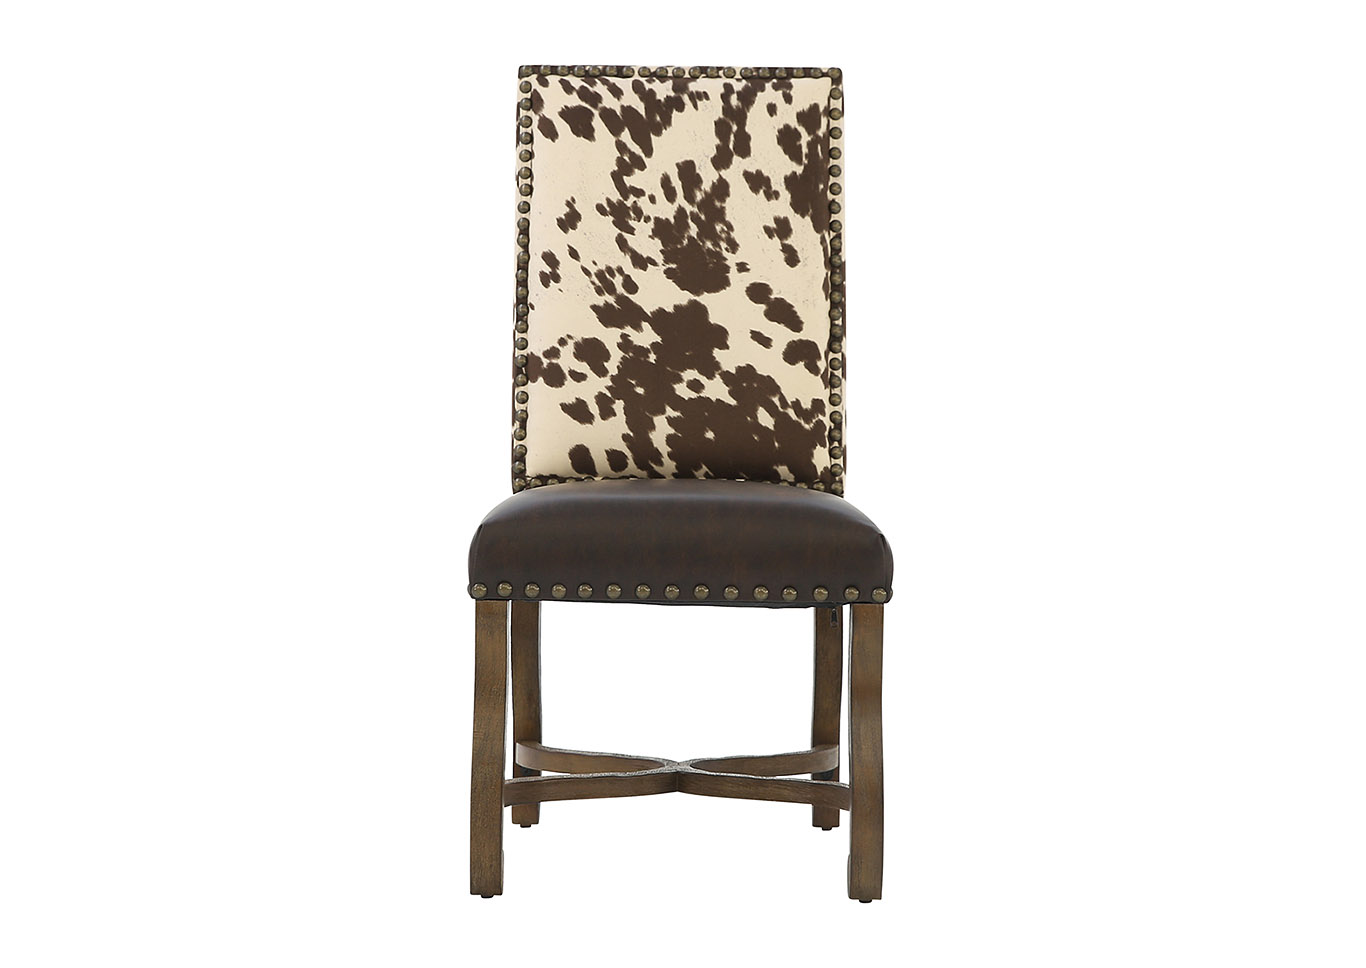 MESQUITE RANCH LEATHER/FAUX COWHIDE SIDE CHAIR,CRESTVIEW COLLECTION